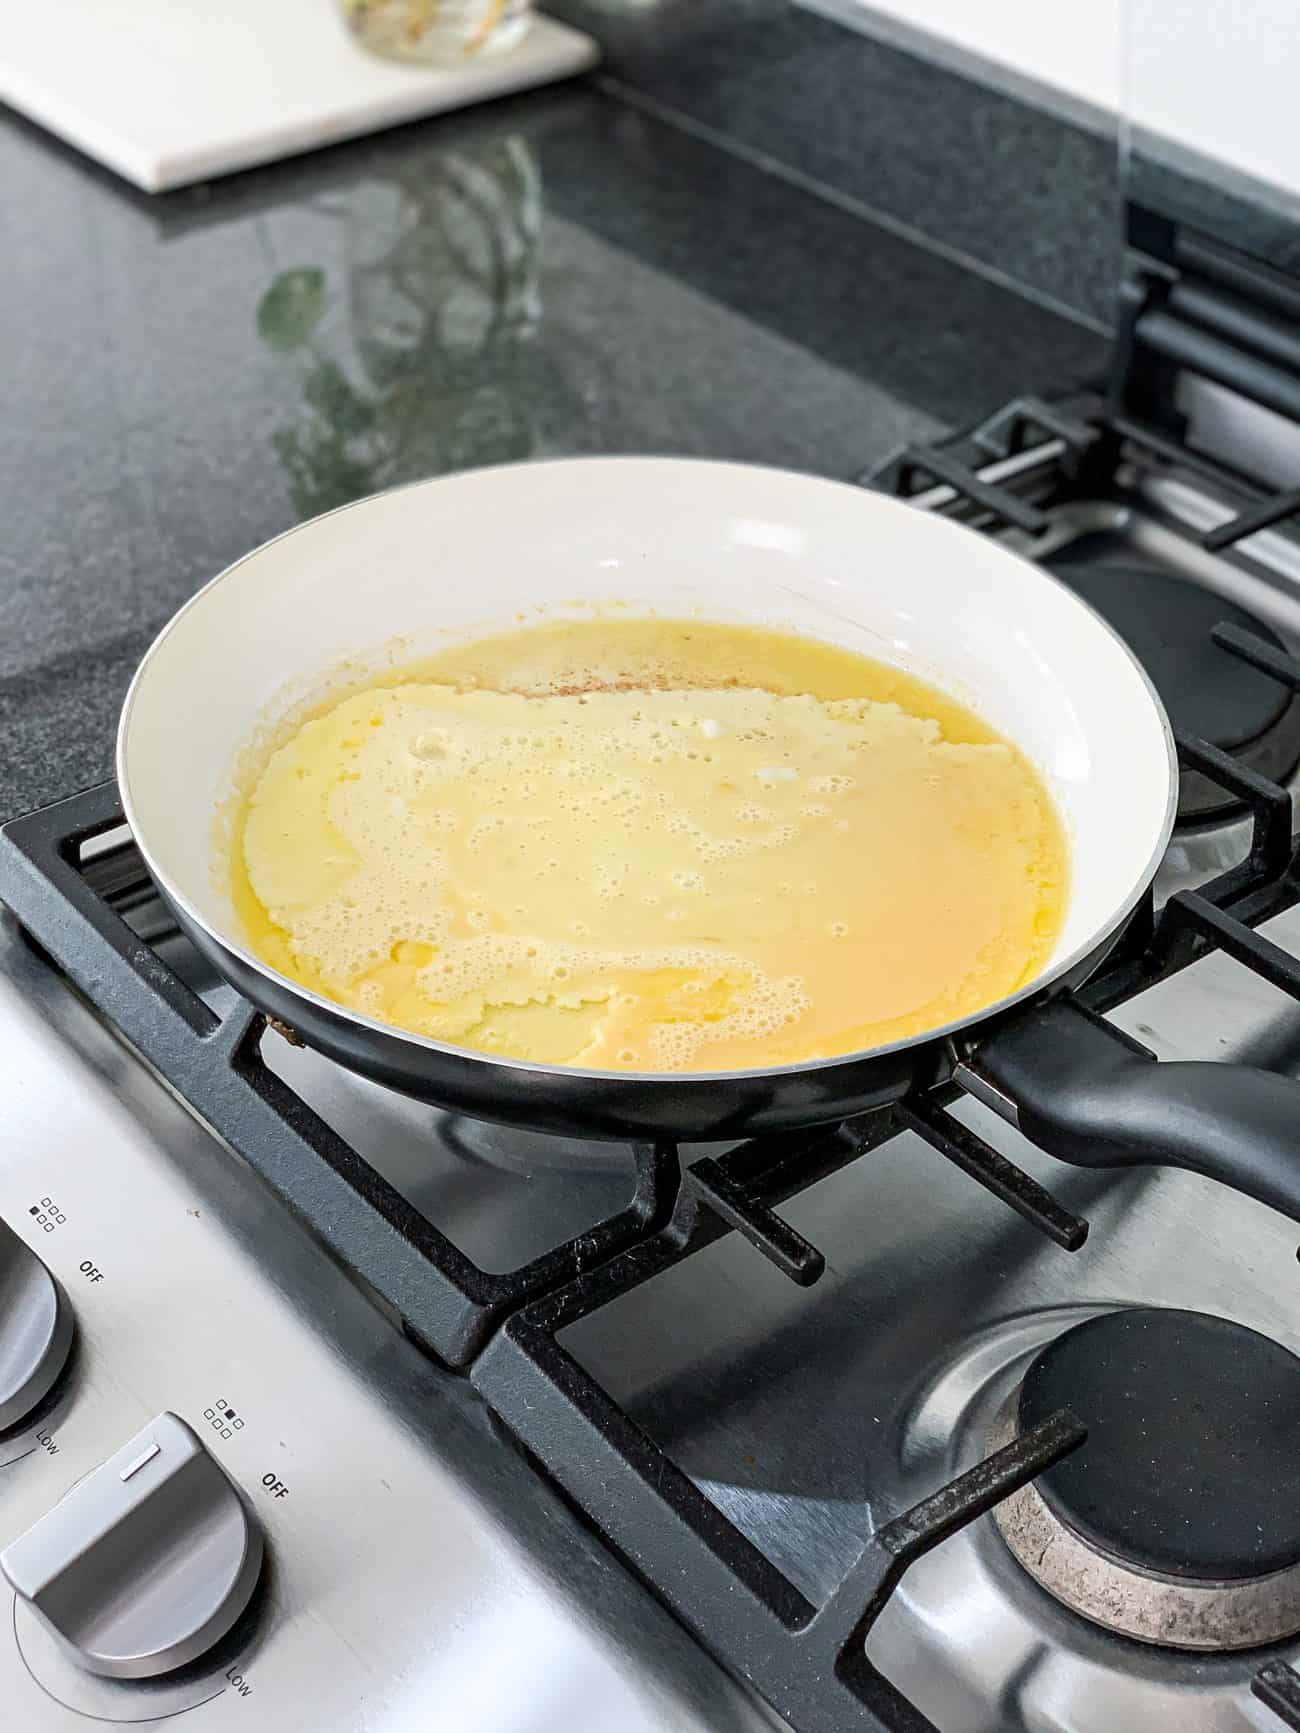 Add egg to the skillet with butter and leave flat for 1 minute. Then flip to cook the other side for another minute.